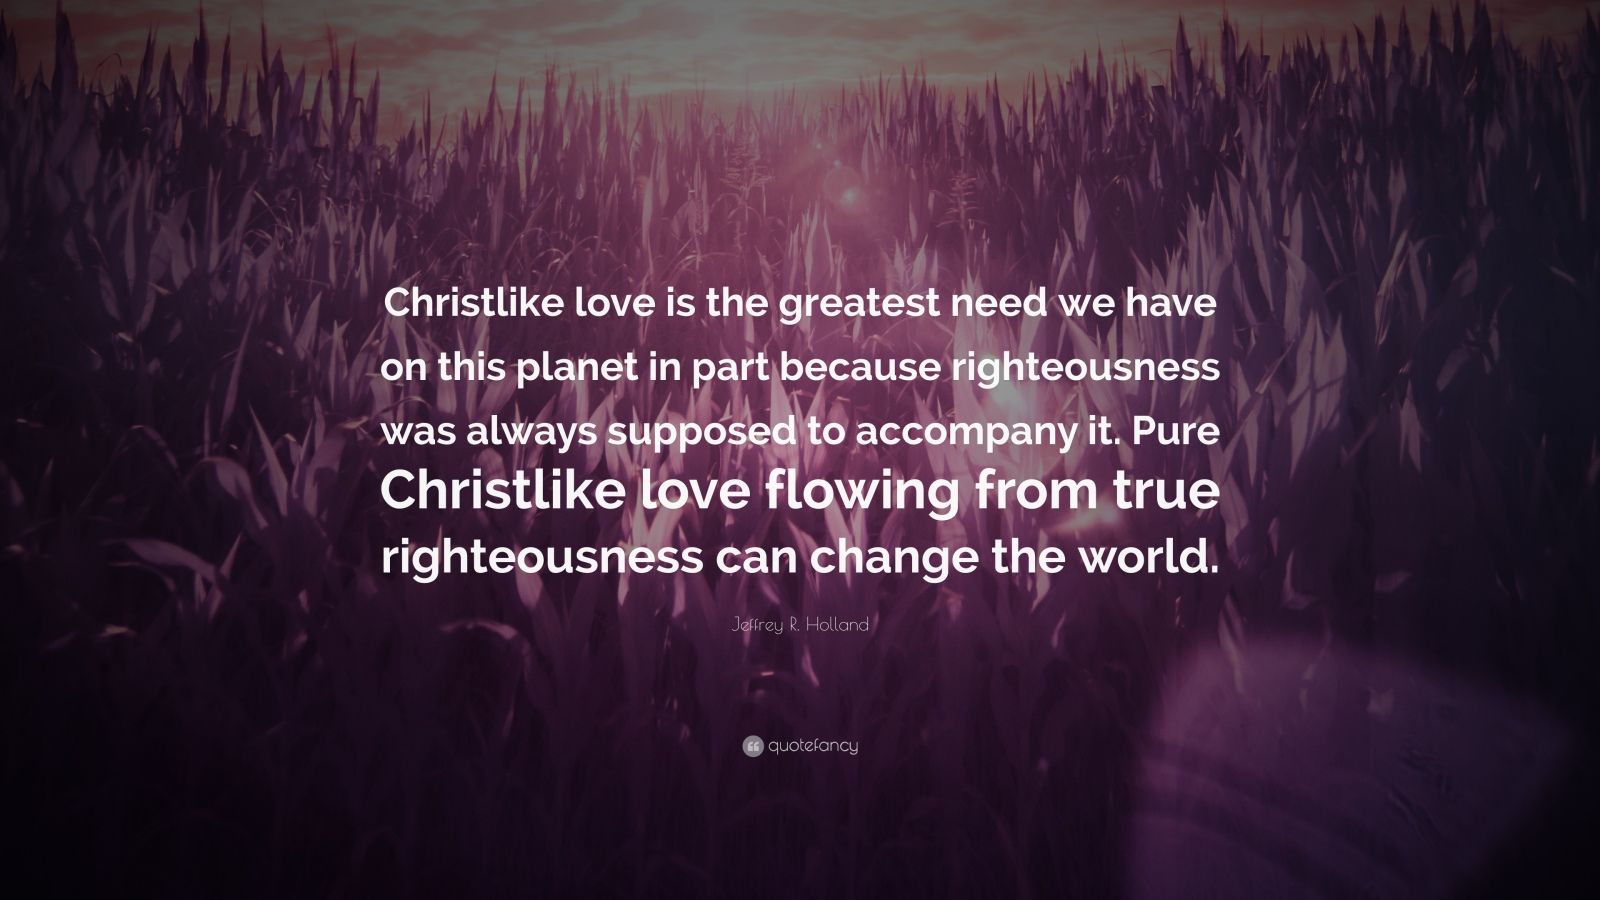 Jeffrey R Holland Quote “Christlike love is the greatest need we have on